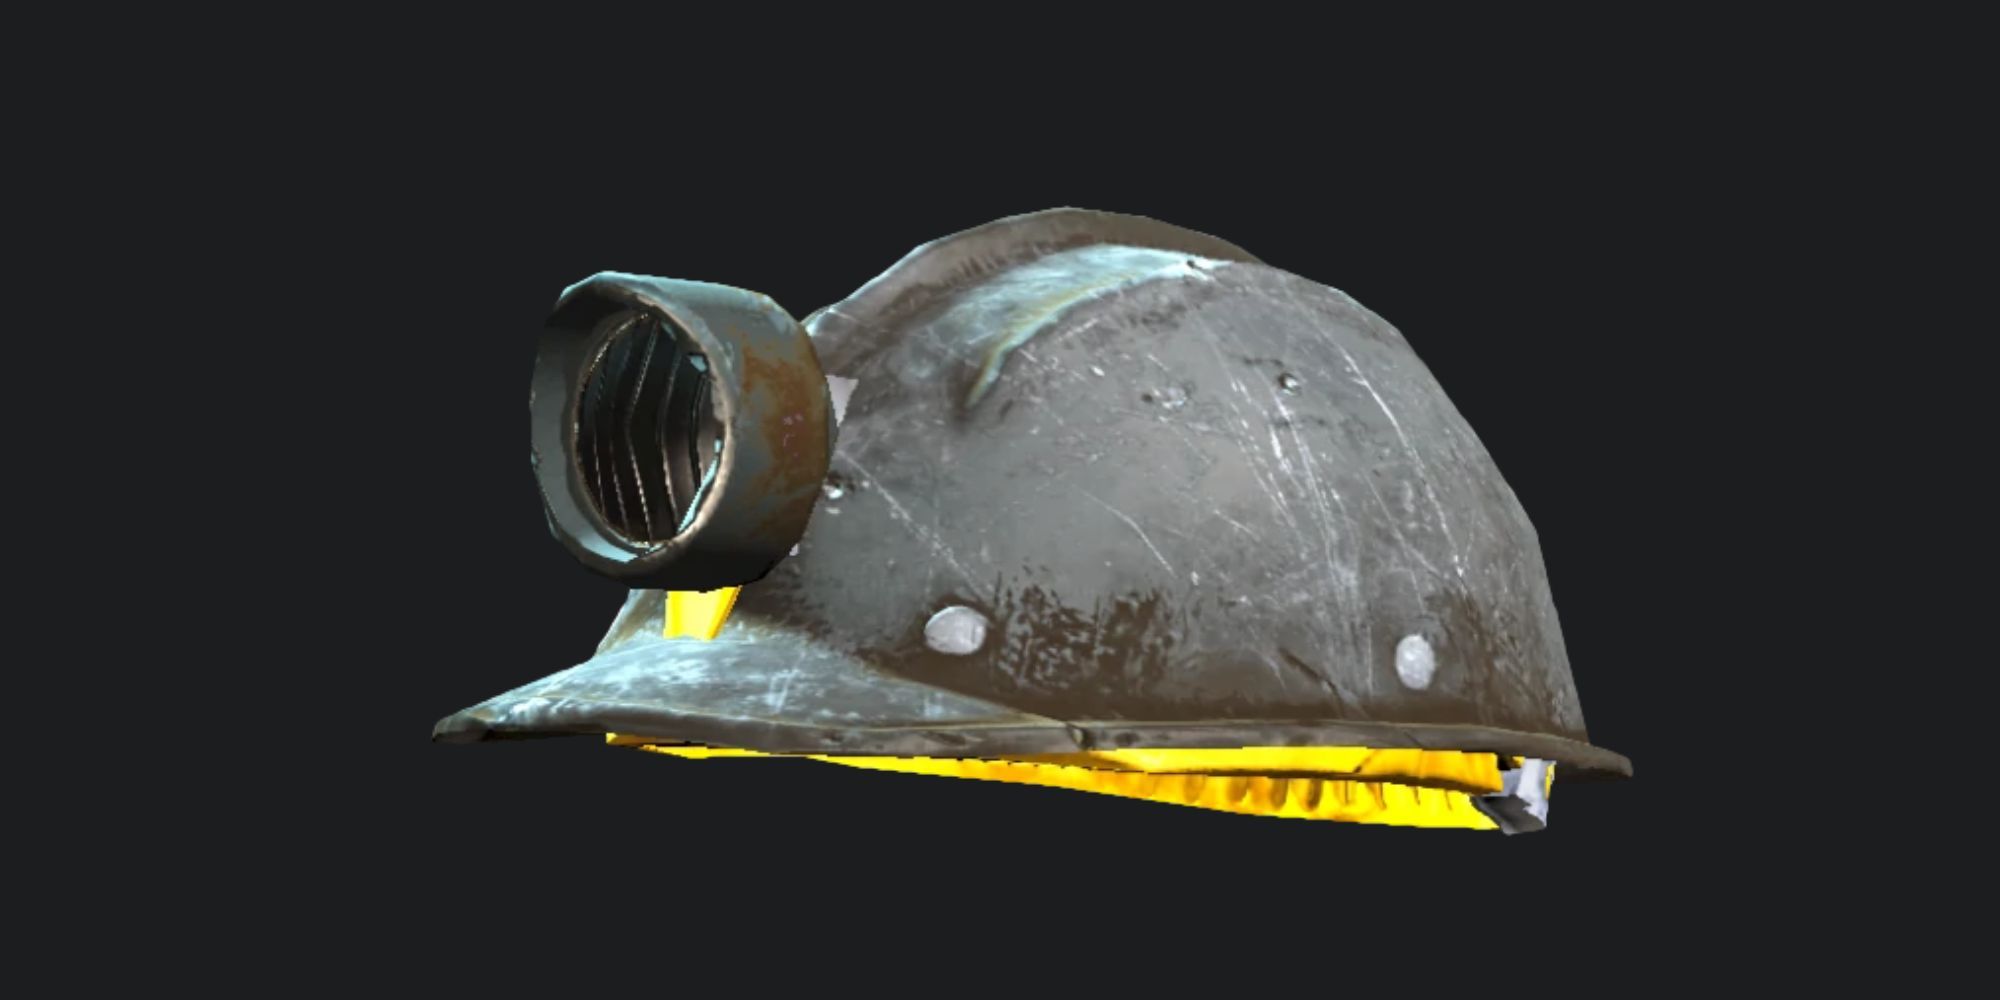 Fallout 4 Mining Helmet With A Dark Background